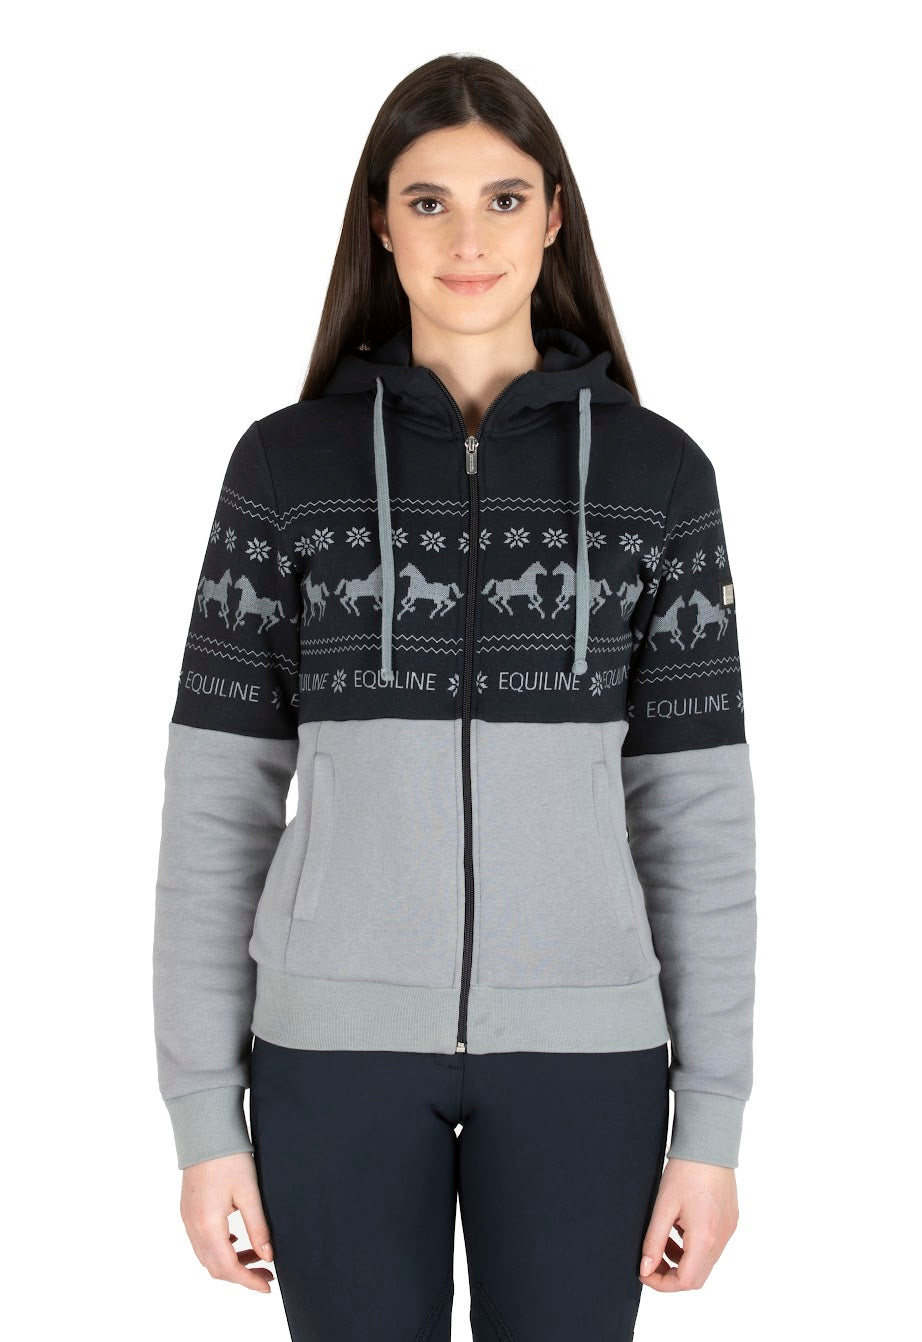 Get into the seasons spirit with the new range from Equiline. The Equiline Grigio Light Grey Snowflake Zip Hoody is perfect for home, shows or training. It will even look great on the slopes this winter. The s]zip through hoody had a draw string hood with contrast pulley with the iconic equiline winter design. made from fleece back jersey for extra comfort and warmth.  Matching items available and machine washable